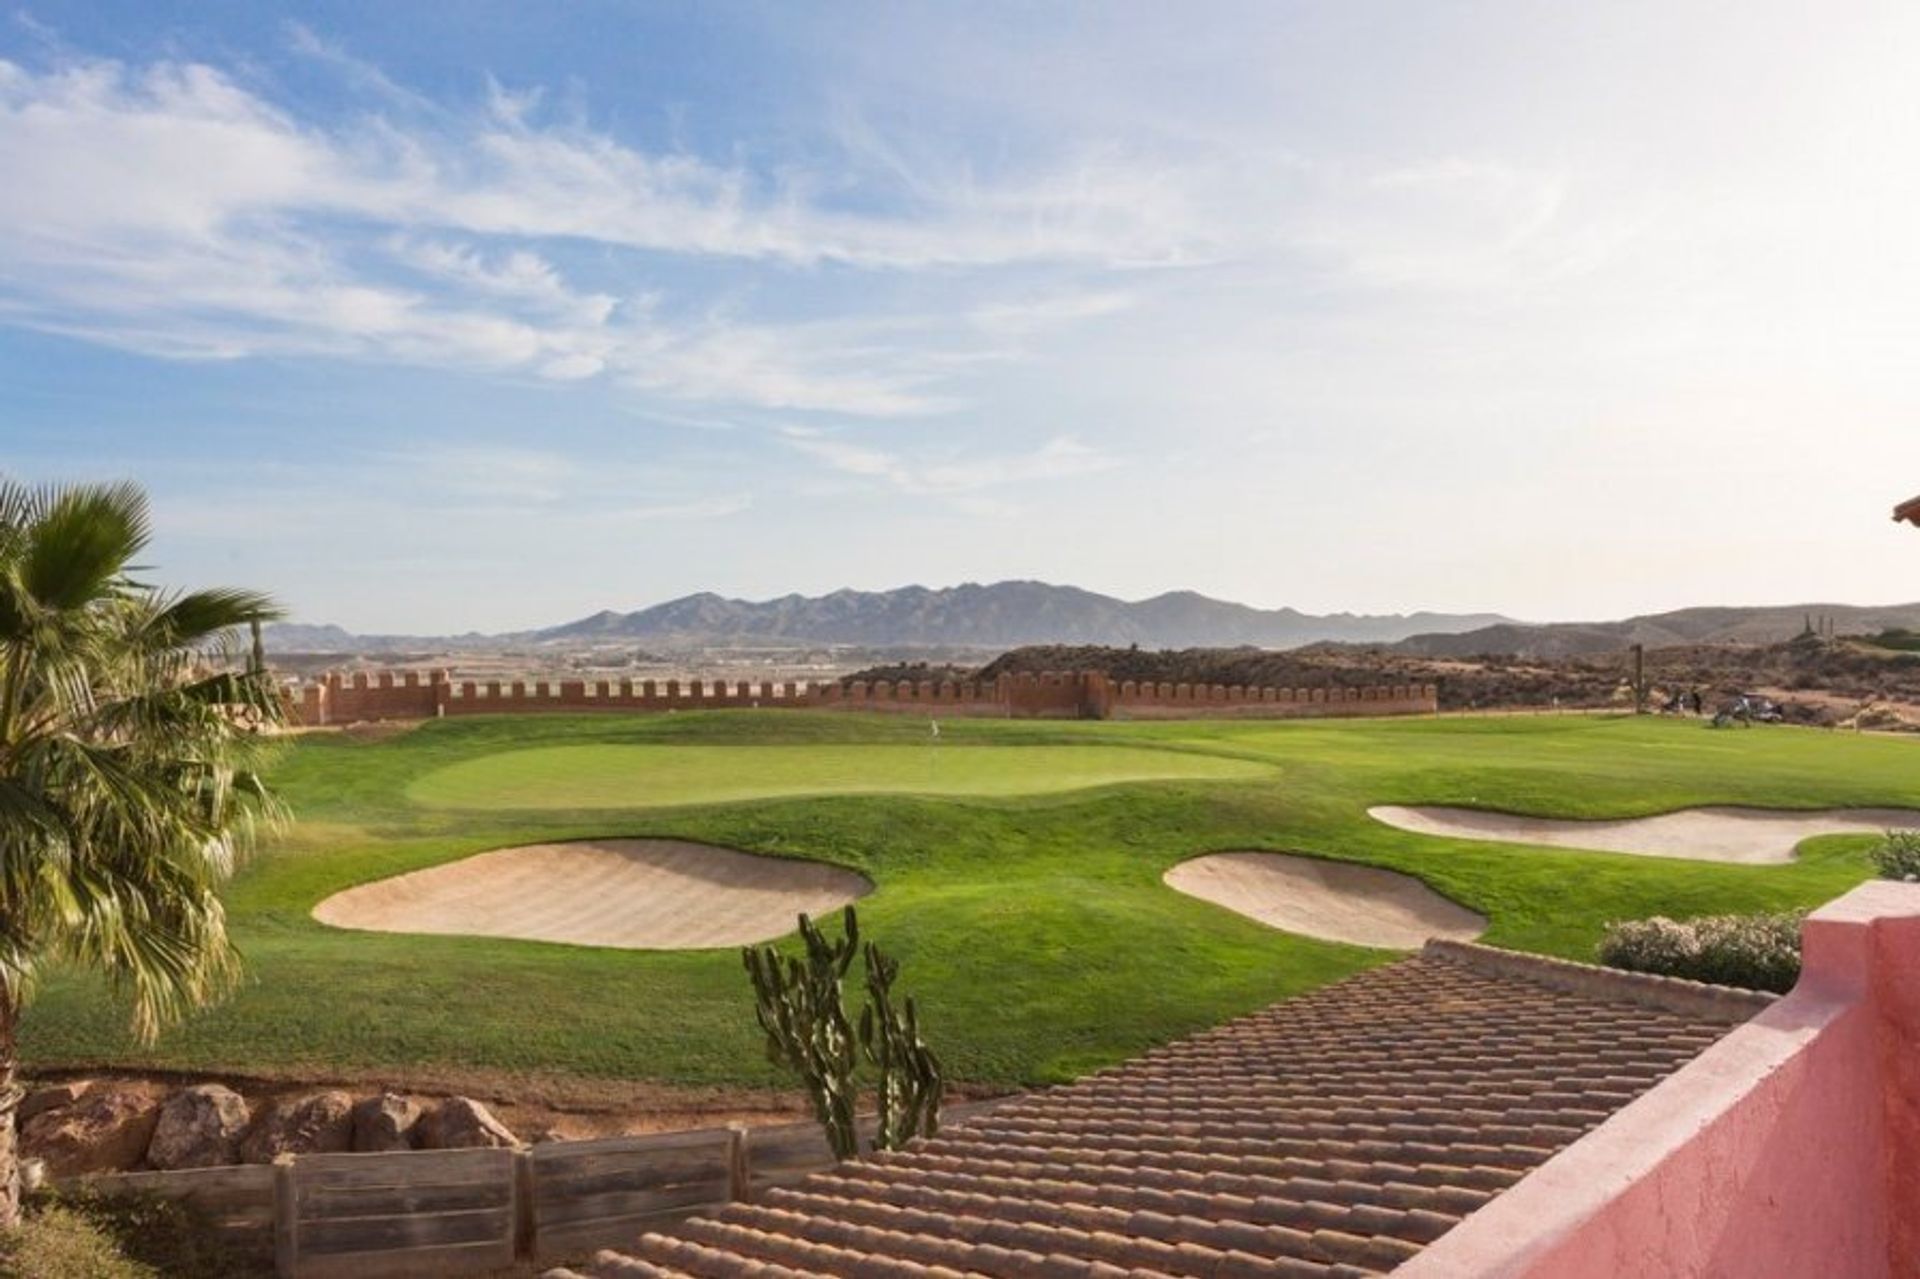 For a fantastic day out with the family, swing a few clubs at Desert Springs Golf Club in the heart of Cuevas de Almanzora